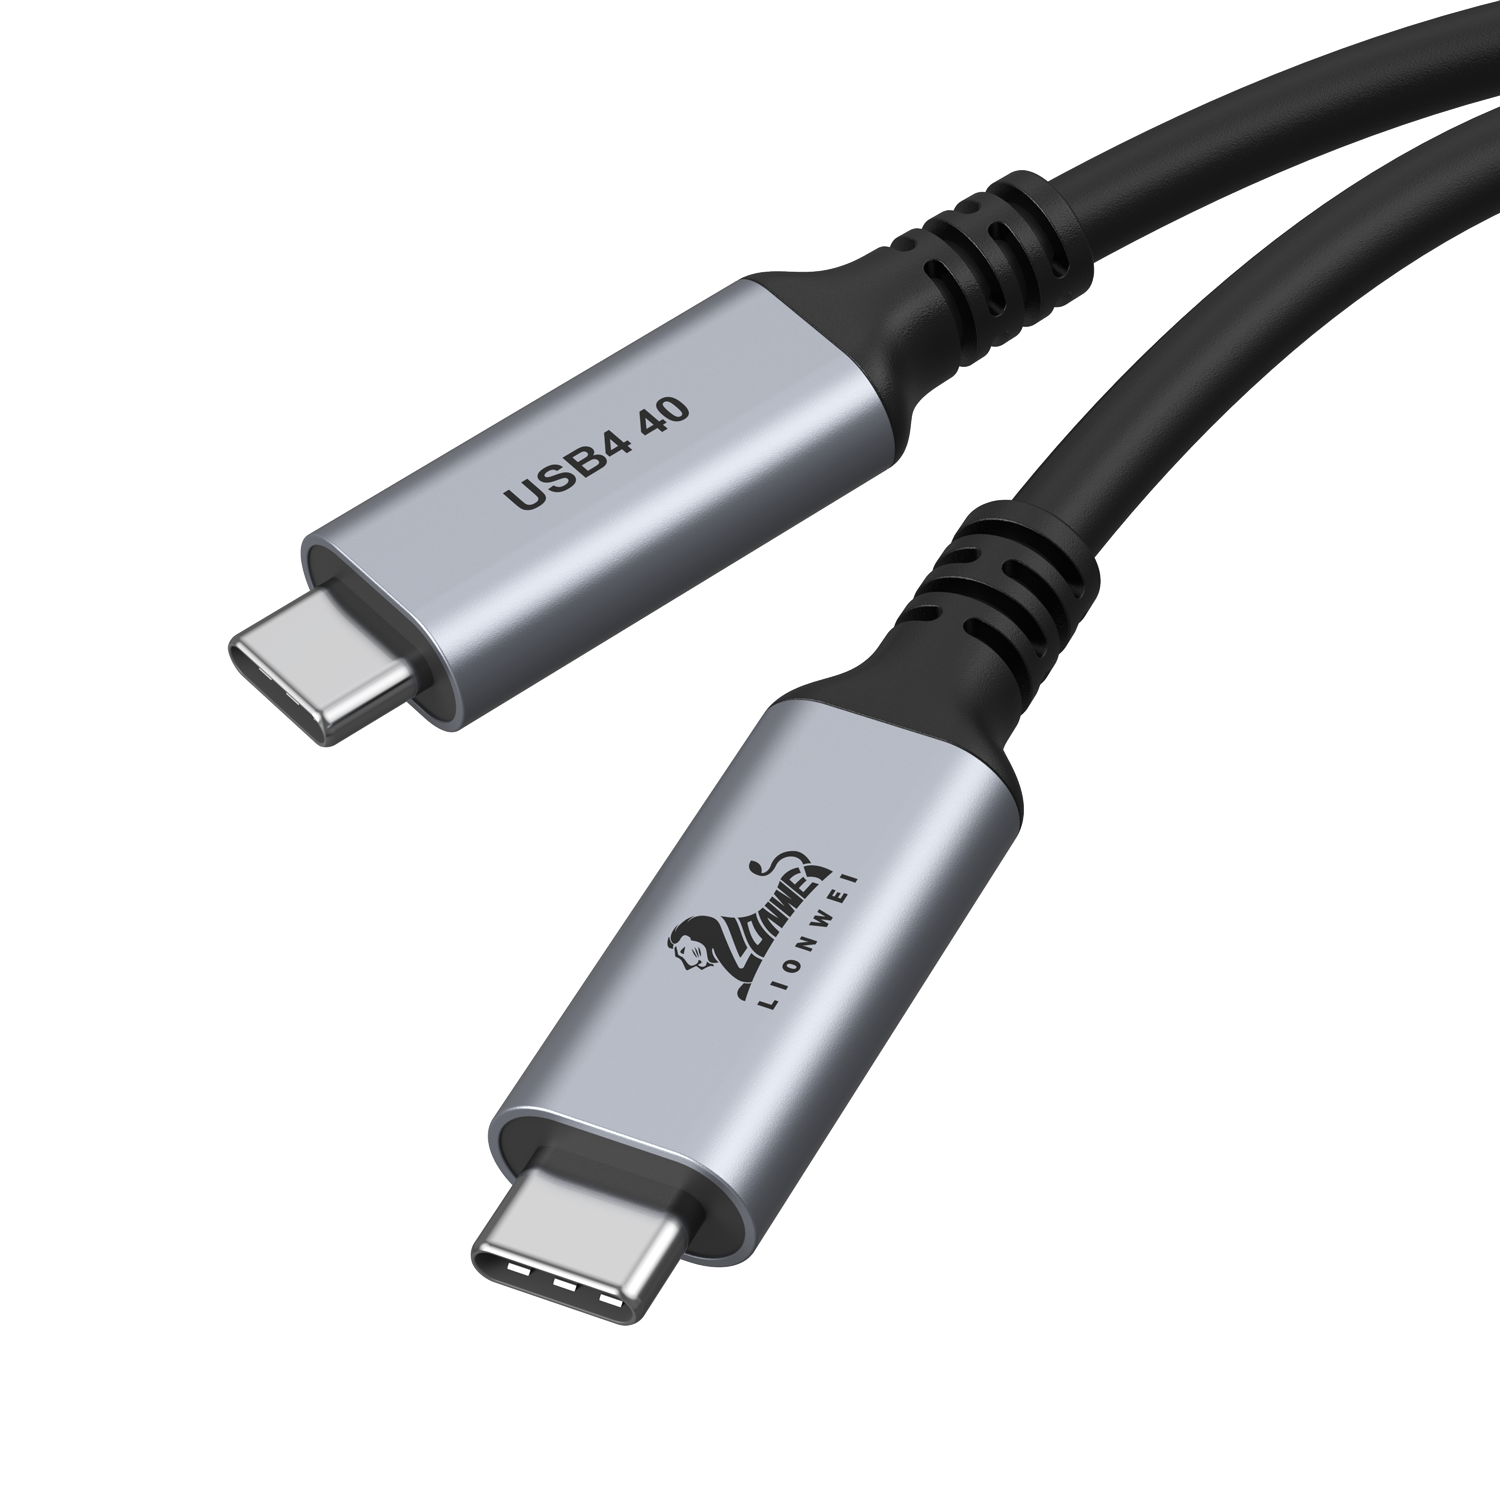 thunderbolt cable to usb